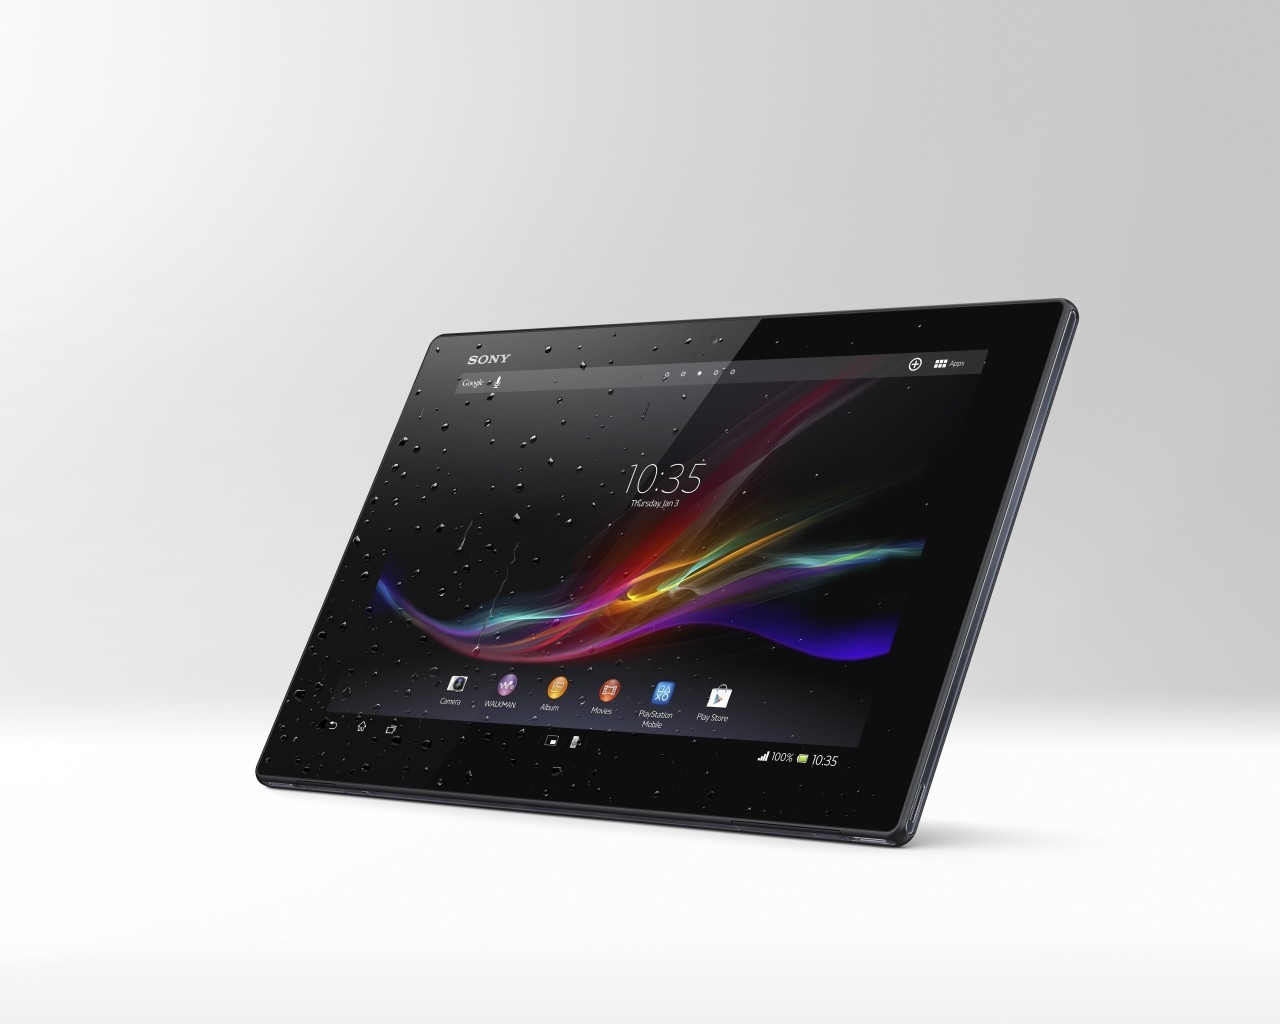 New Sony Xperia Z Tablet for 1280 x 1024 resolution